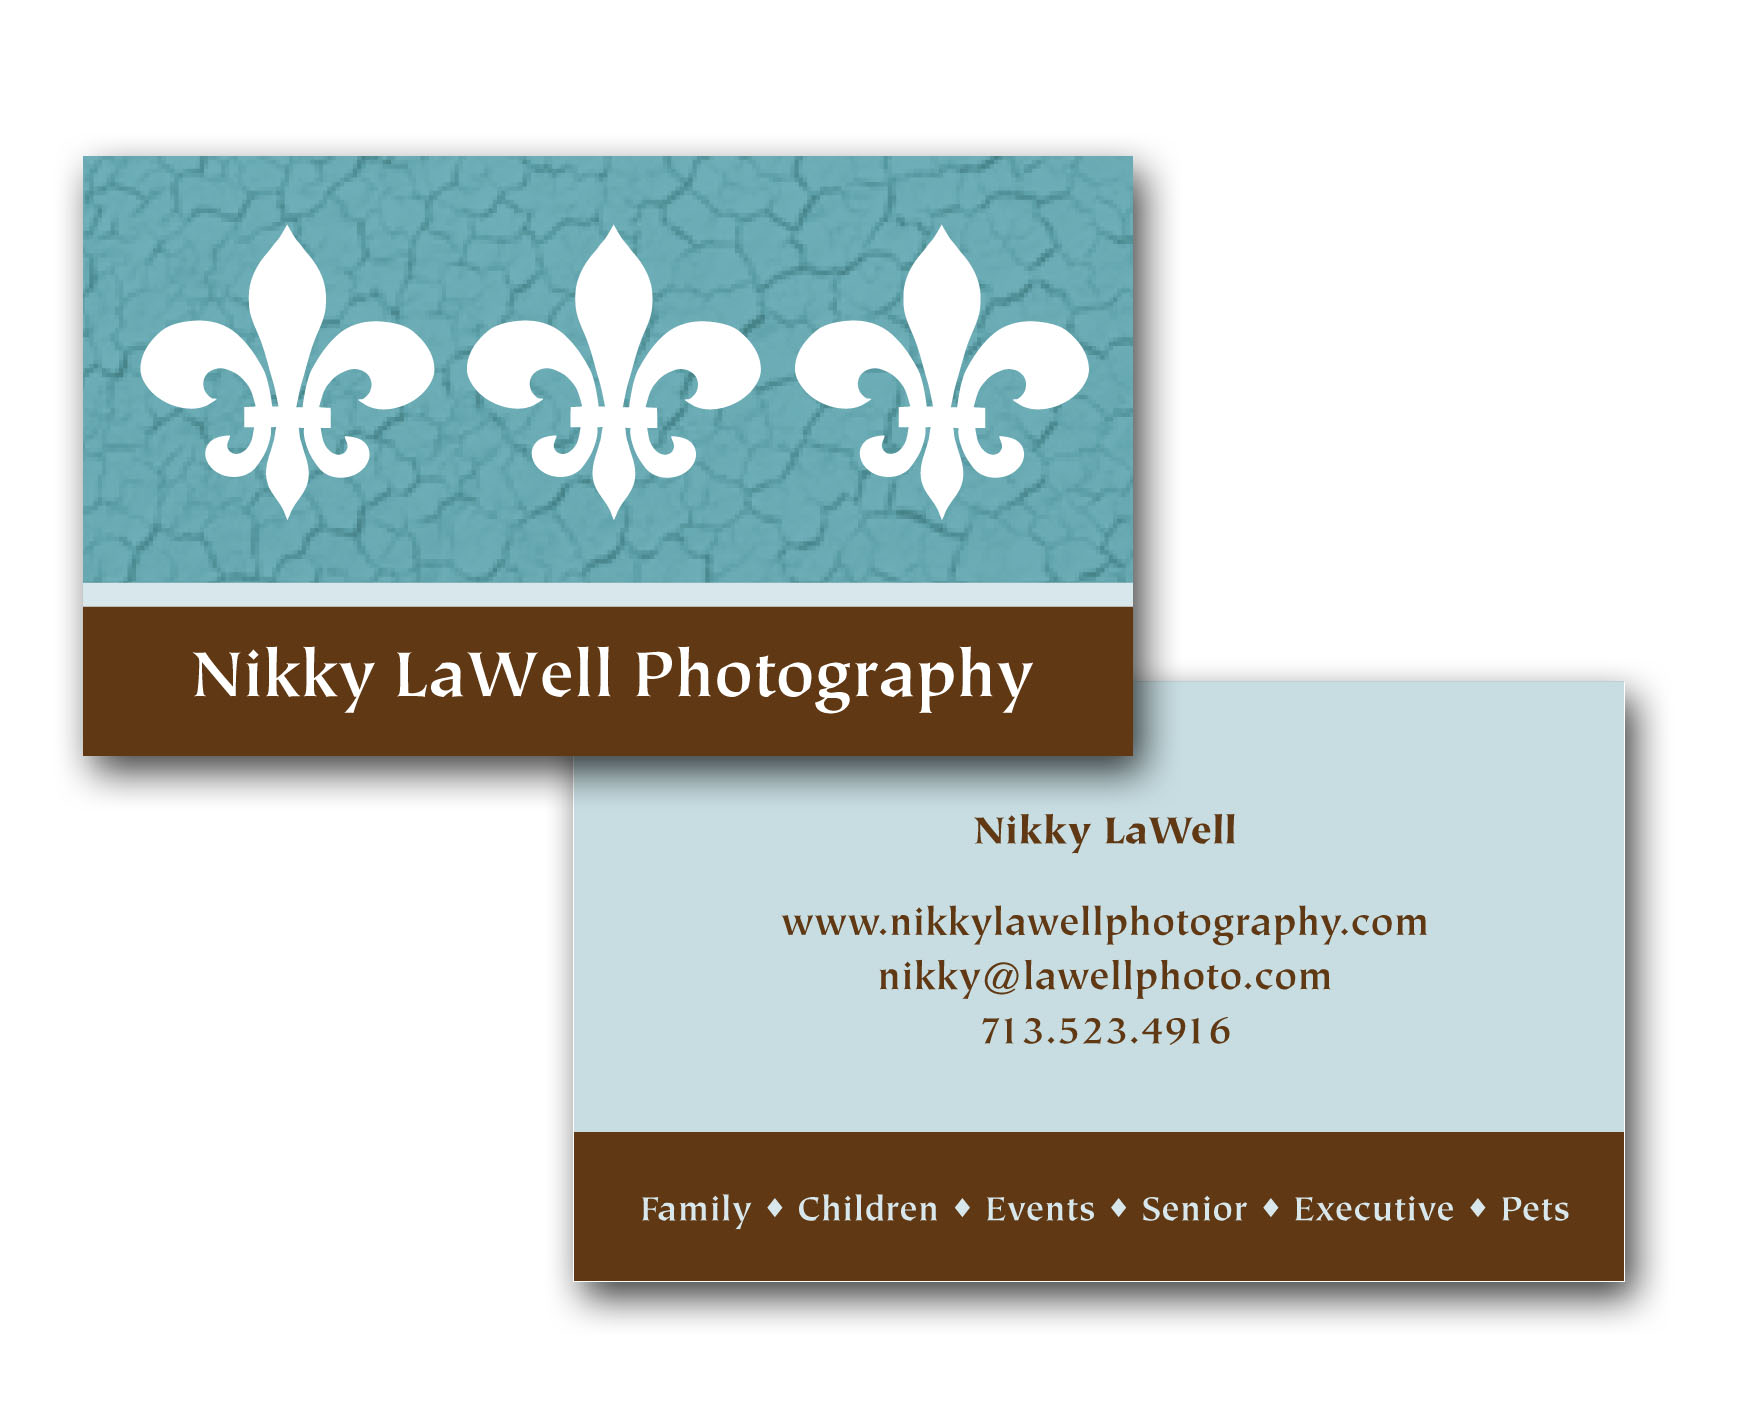 Nikky LaWell Business Card